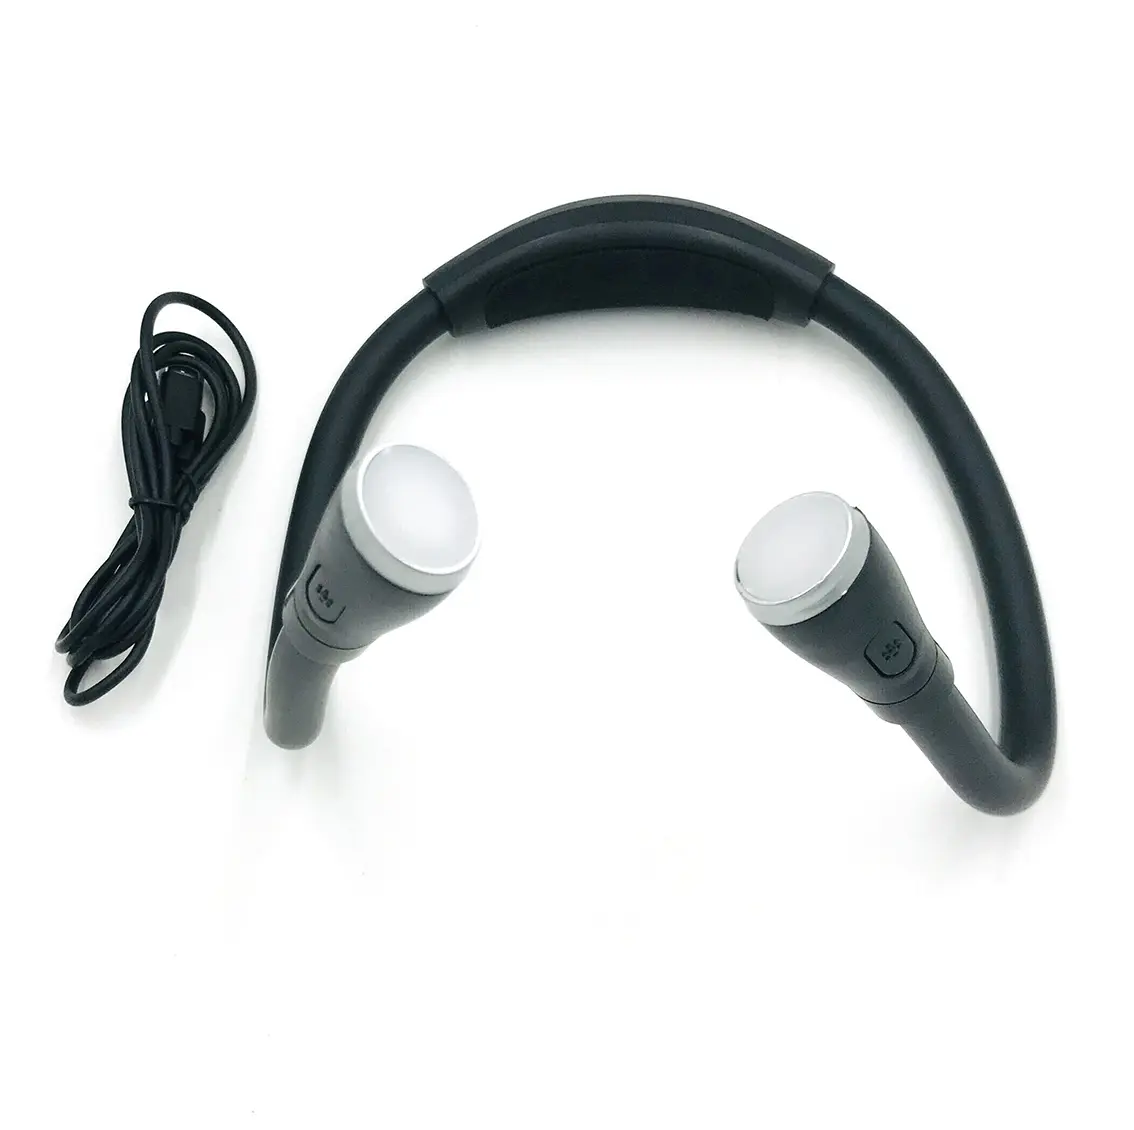 Flexible Rechargeable Neck Reading Light Book Light for Reading in Bed with Bendable Arms